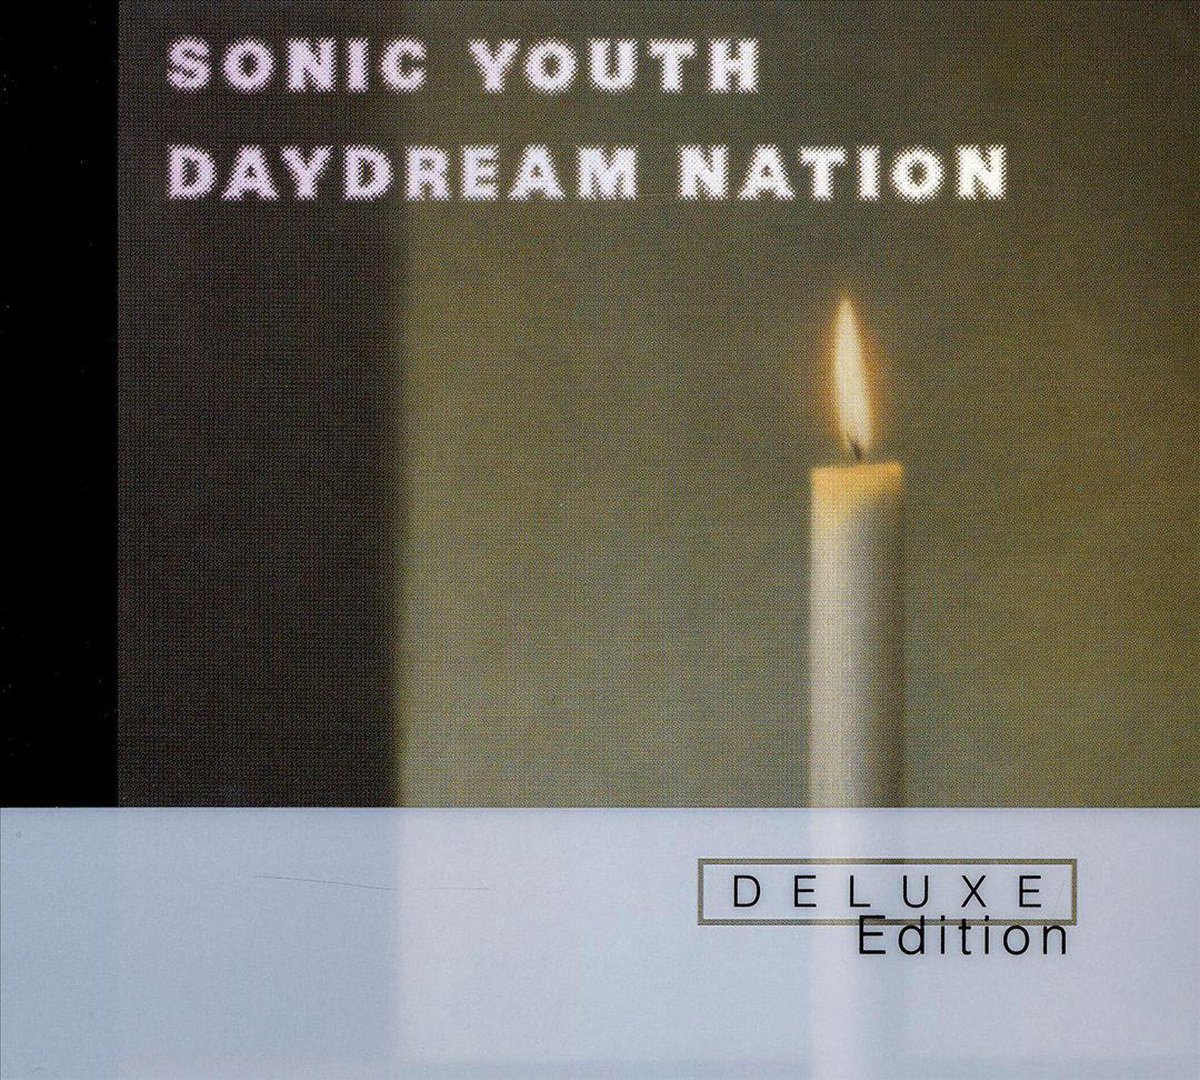 Daydream Nation (Deluxe Edition) - Sonic Youth